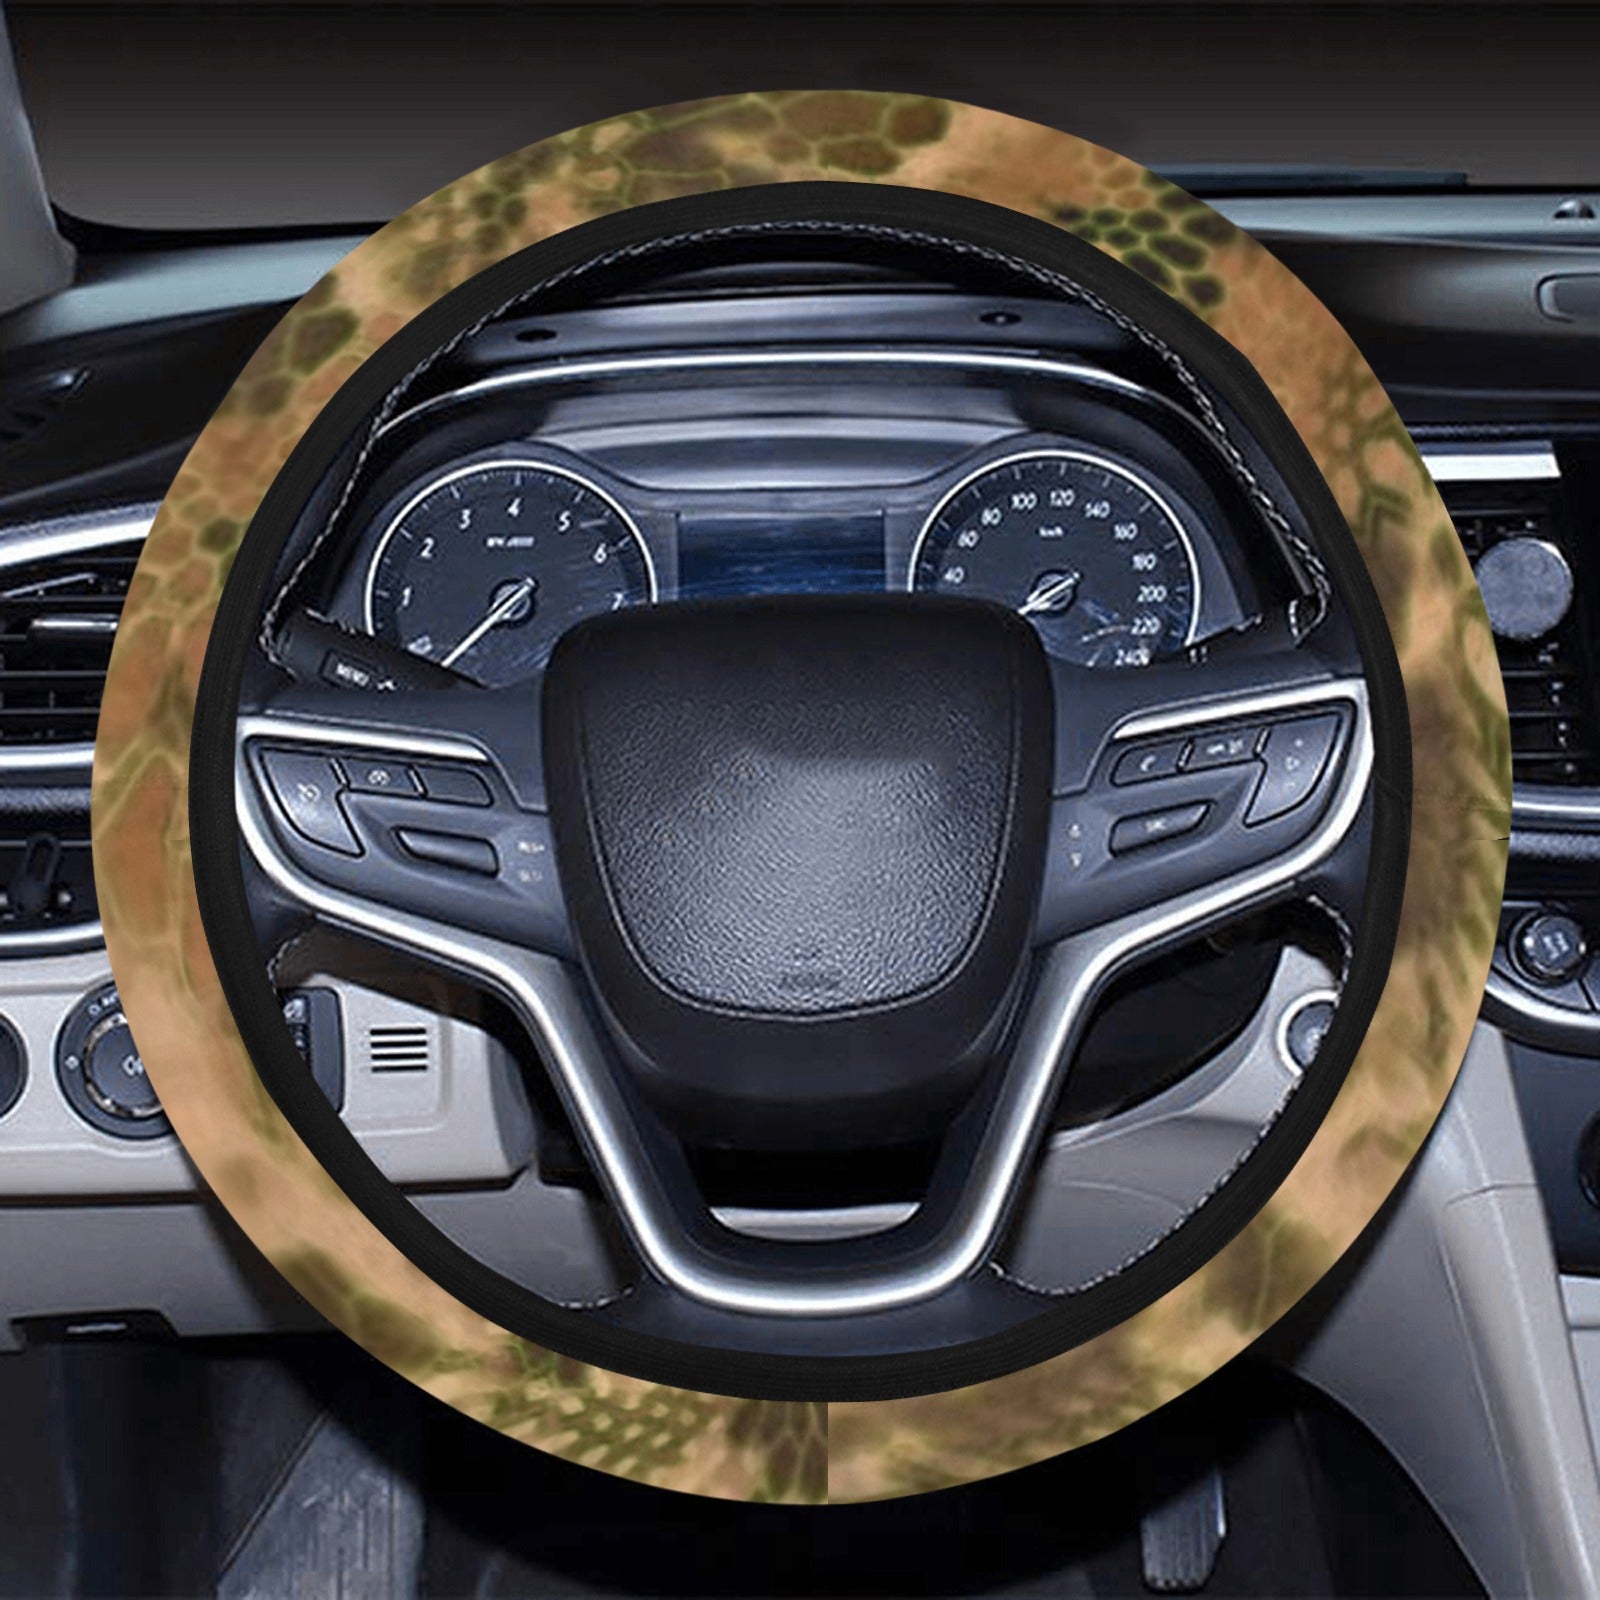 Dry Country Camo Steering Wheel Cover with Elastic Edge